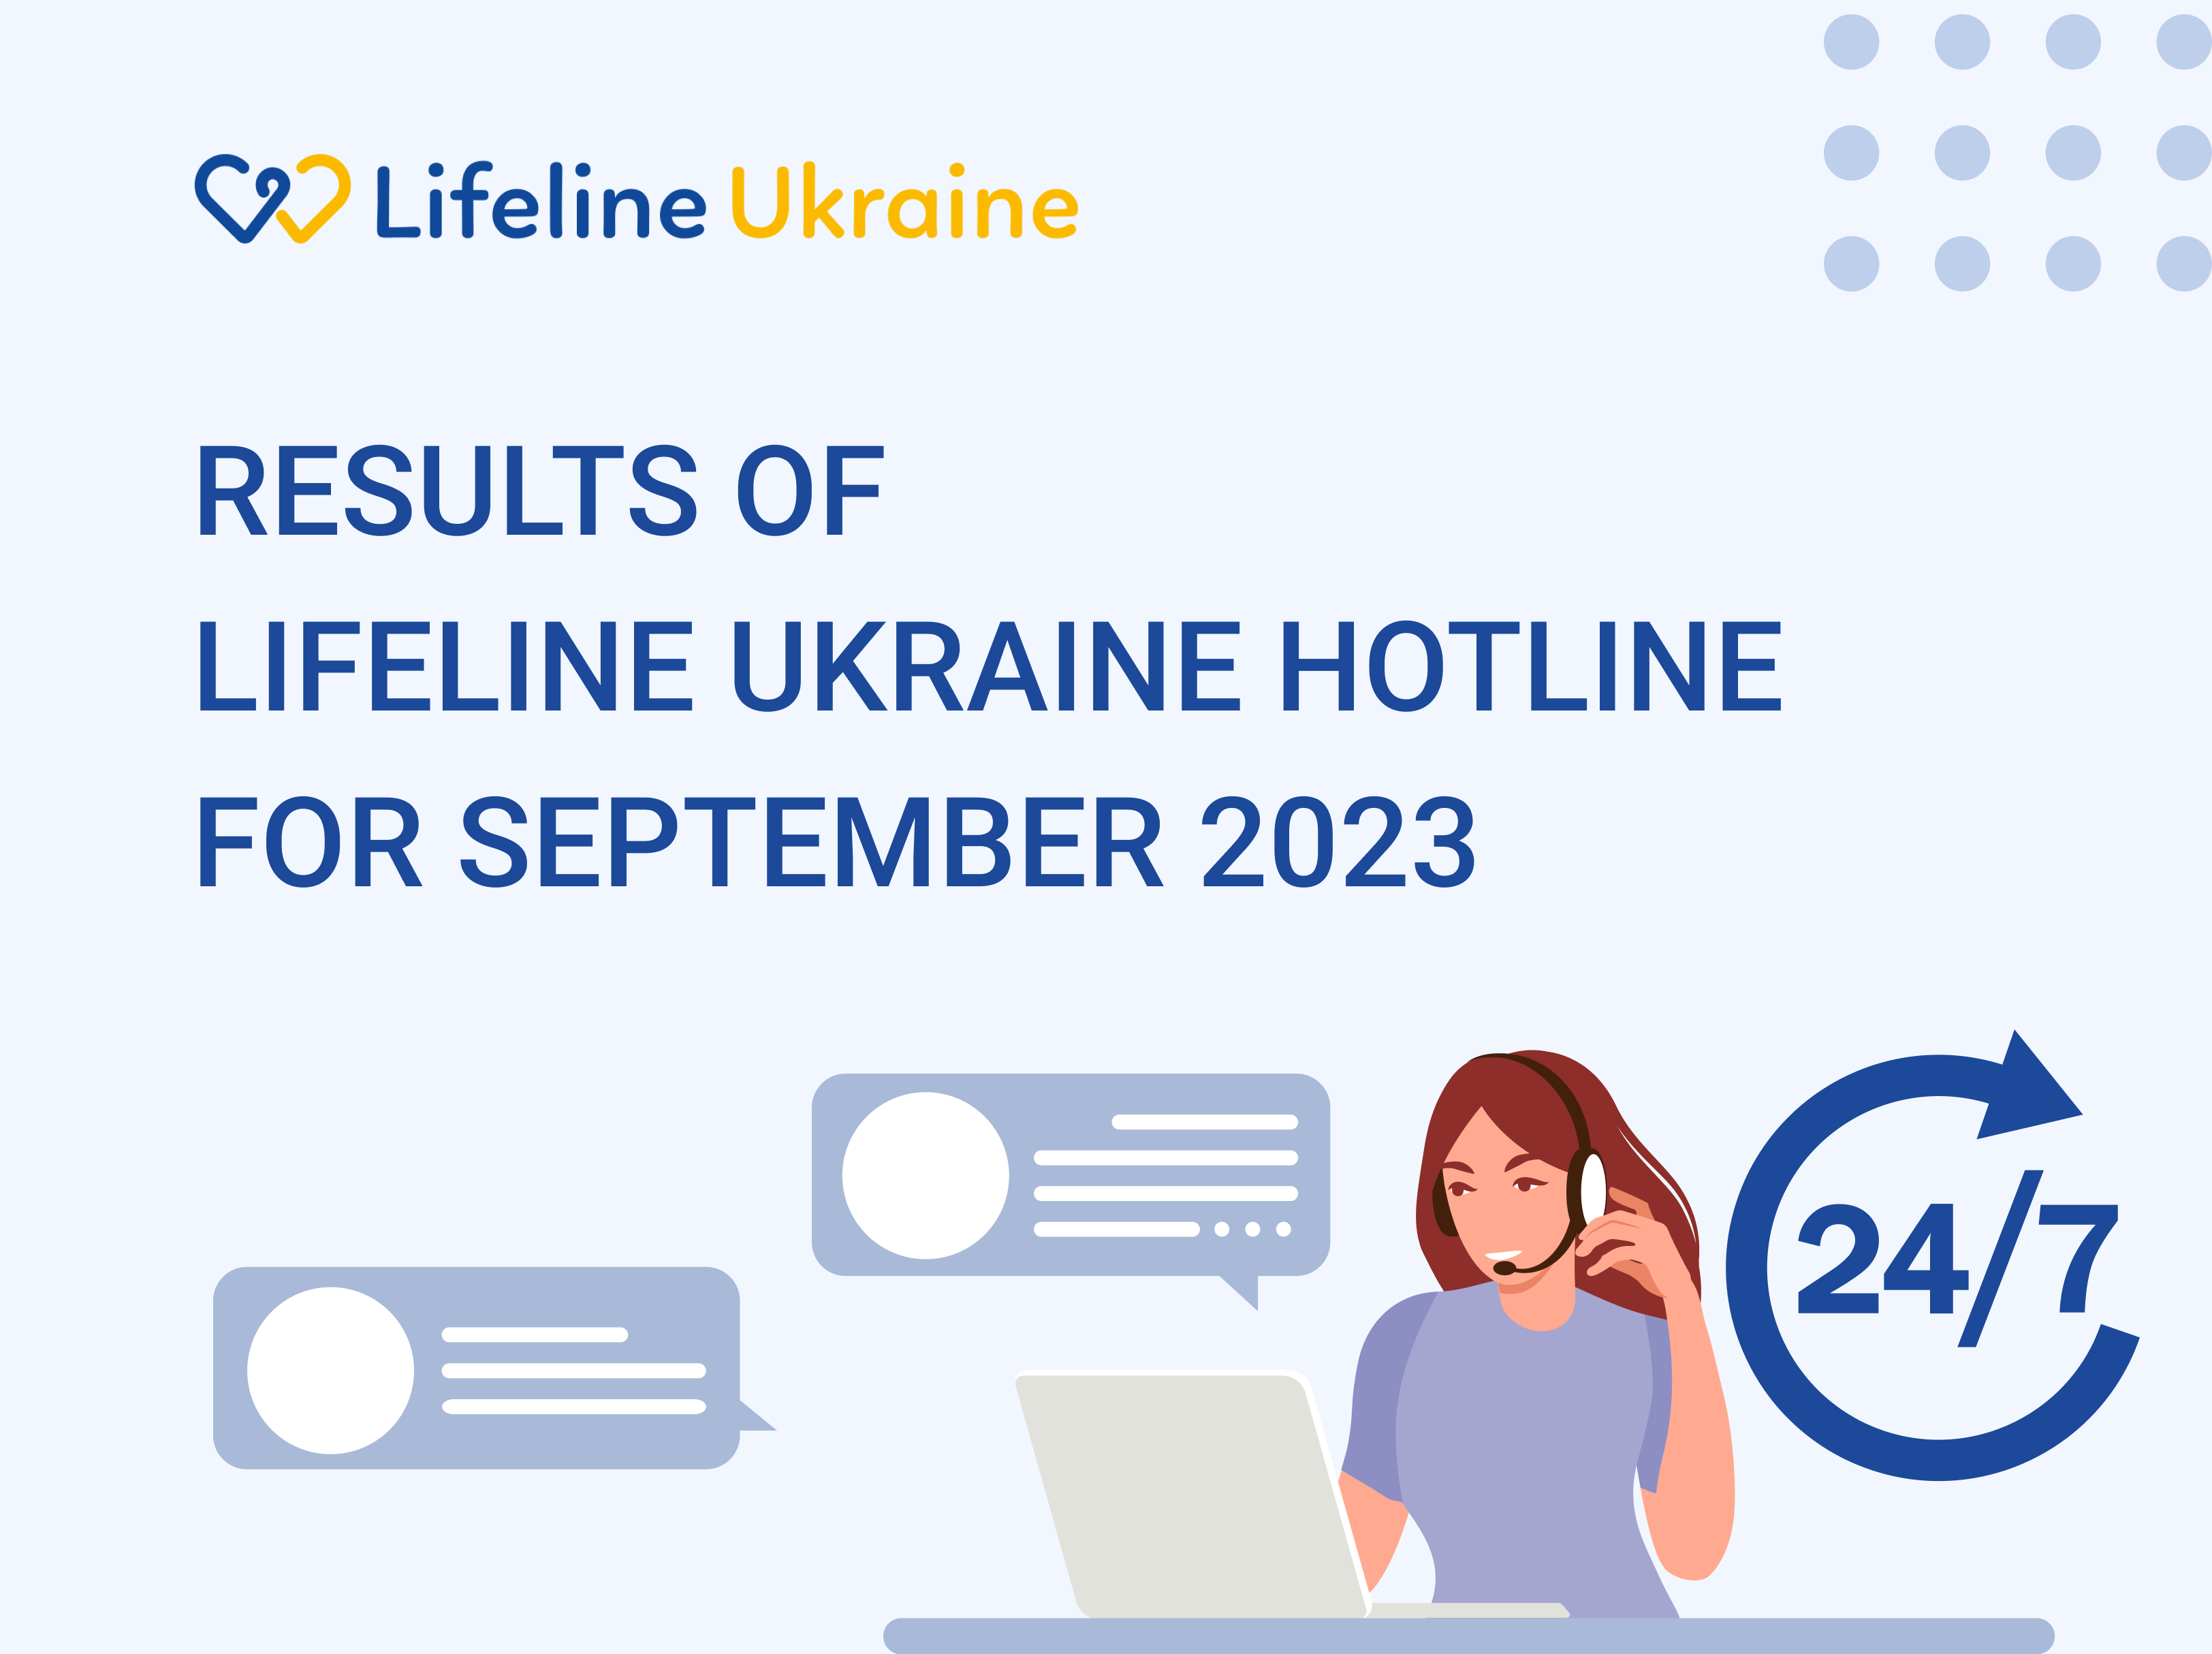 The LifeLine Ukraine hotline manager accepts calls and message in September